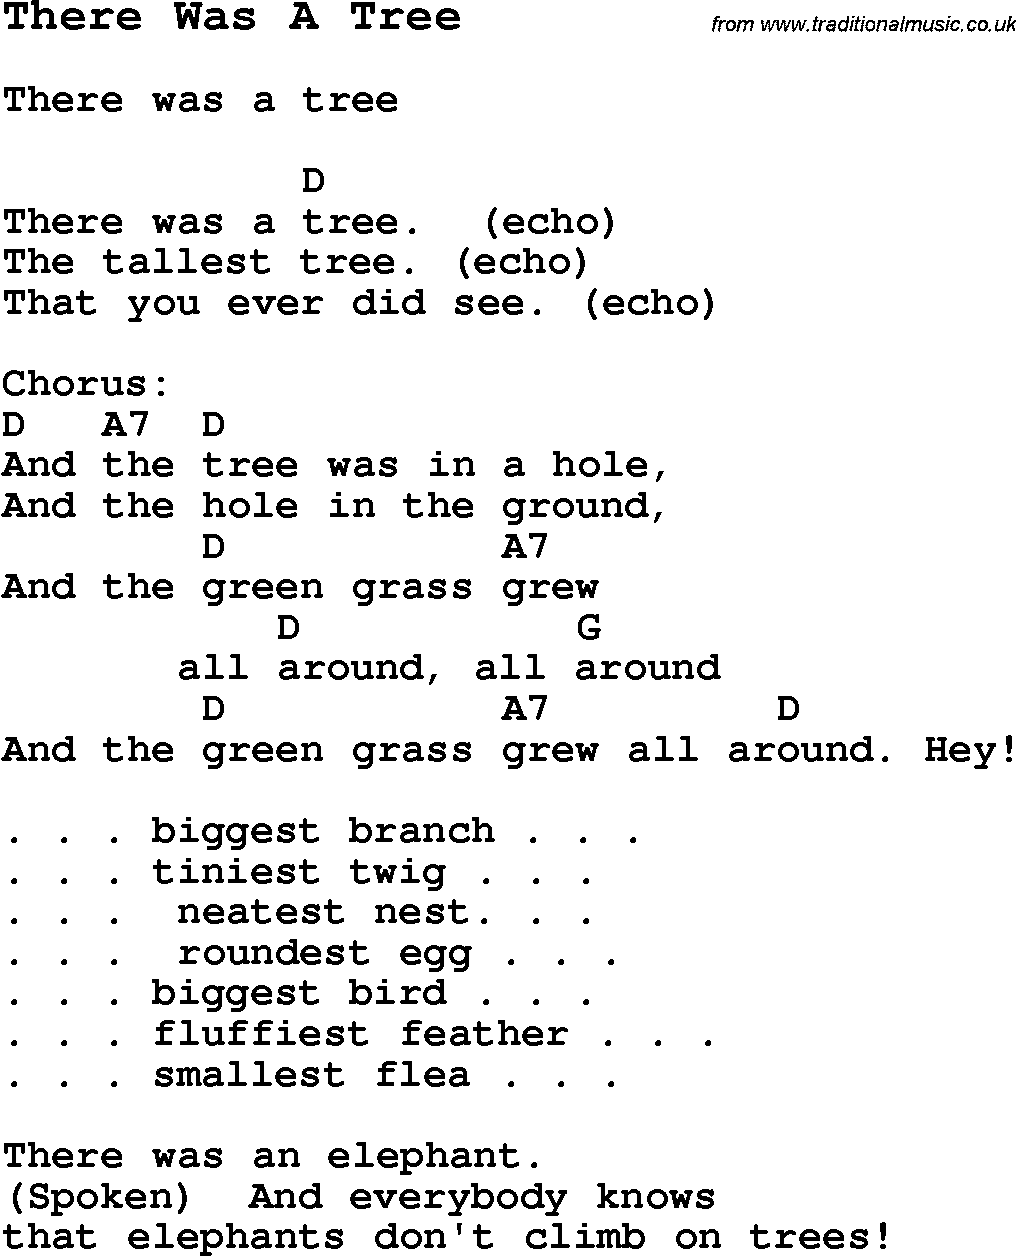 Summer-Camp Song, There Was A Tree, with lyrics and chords for Ukulele, Guitar Banjo etc.